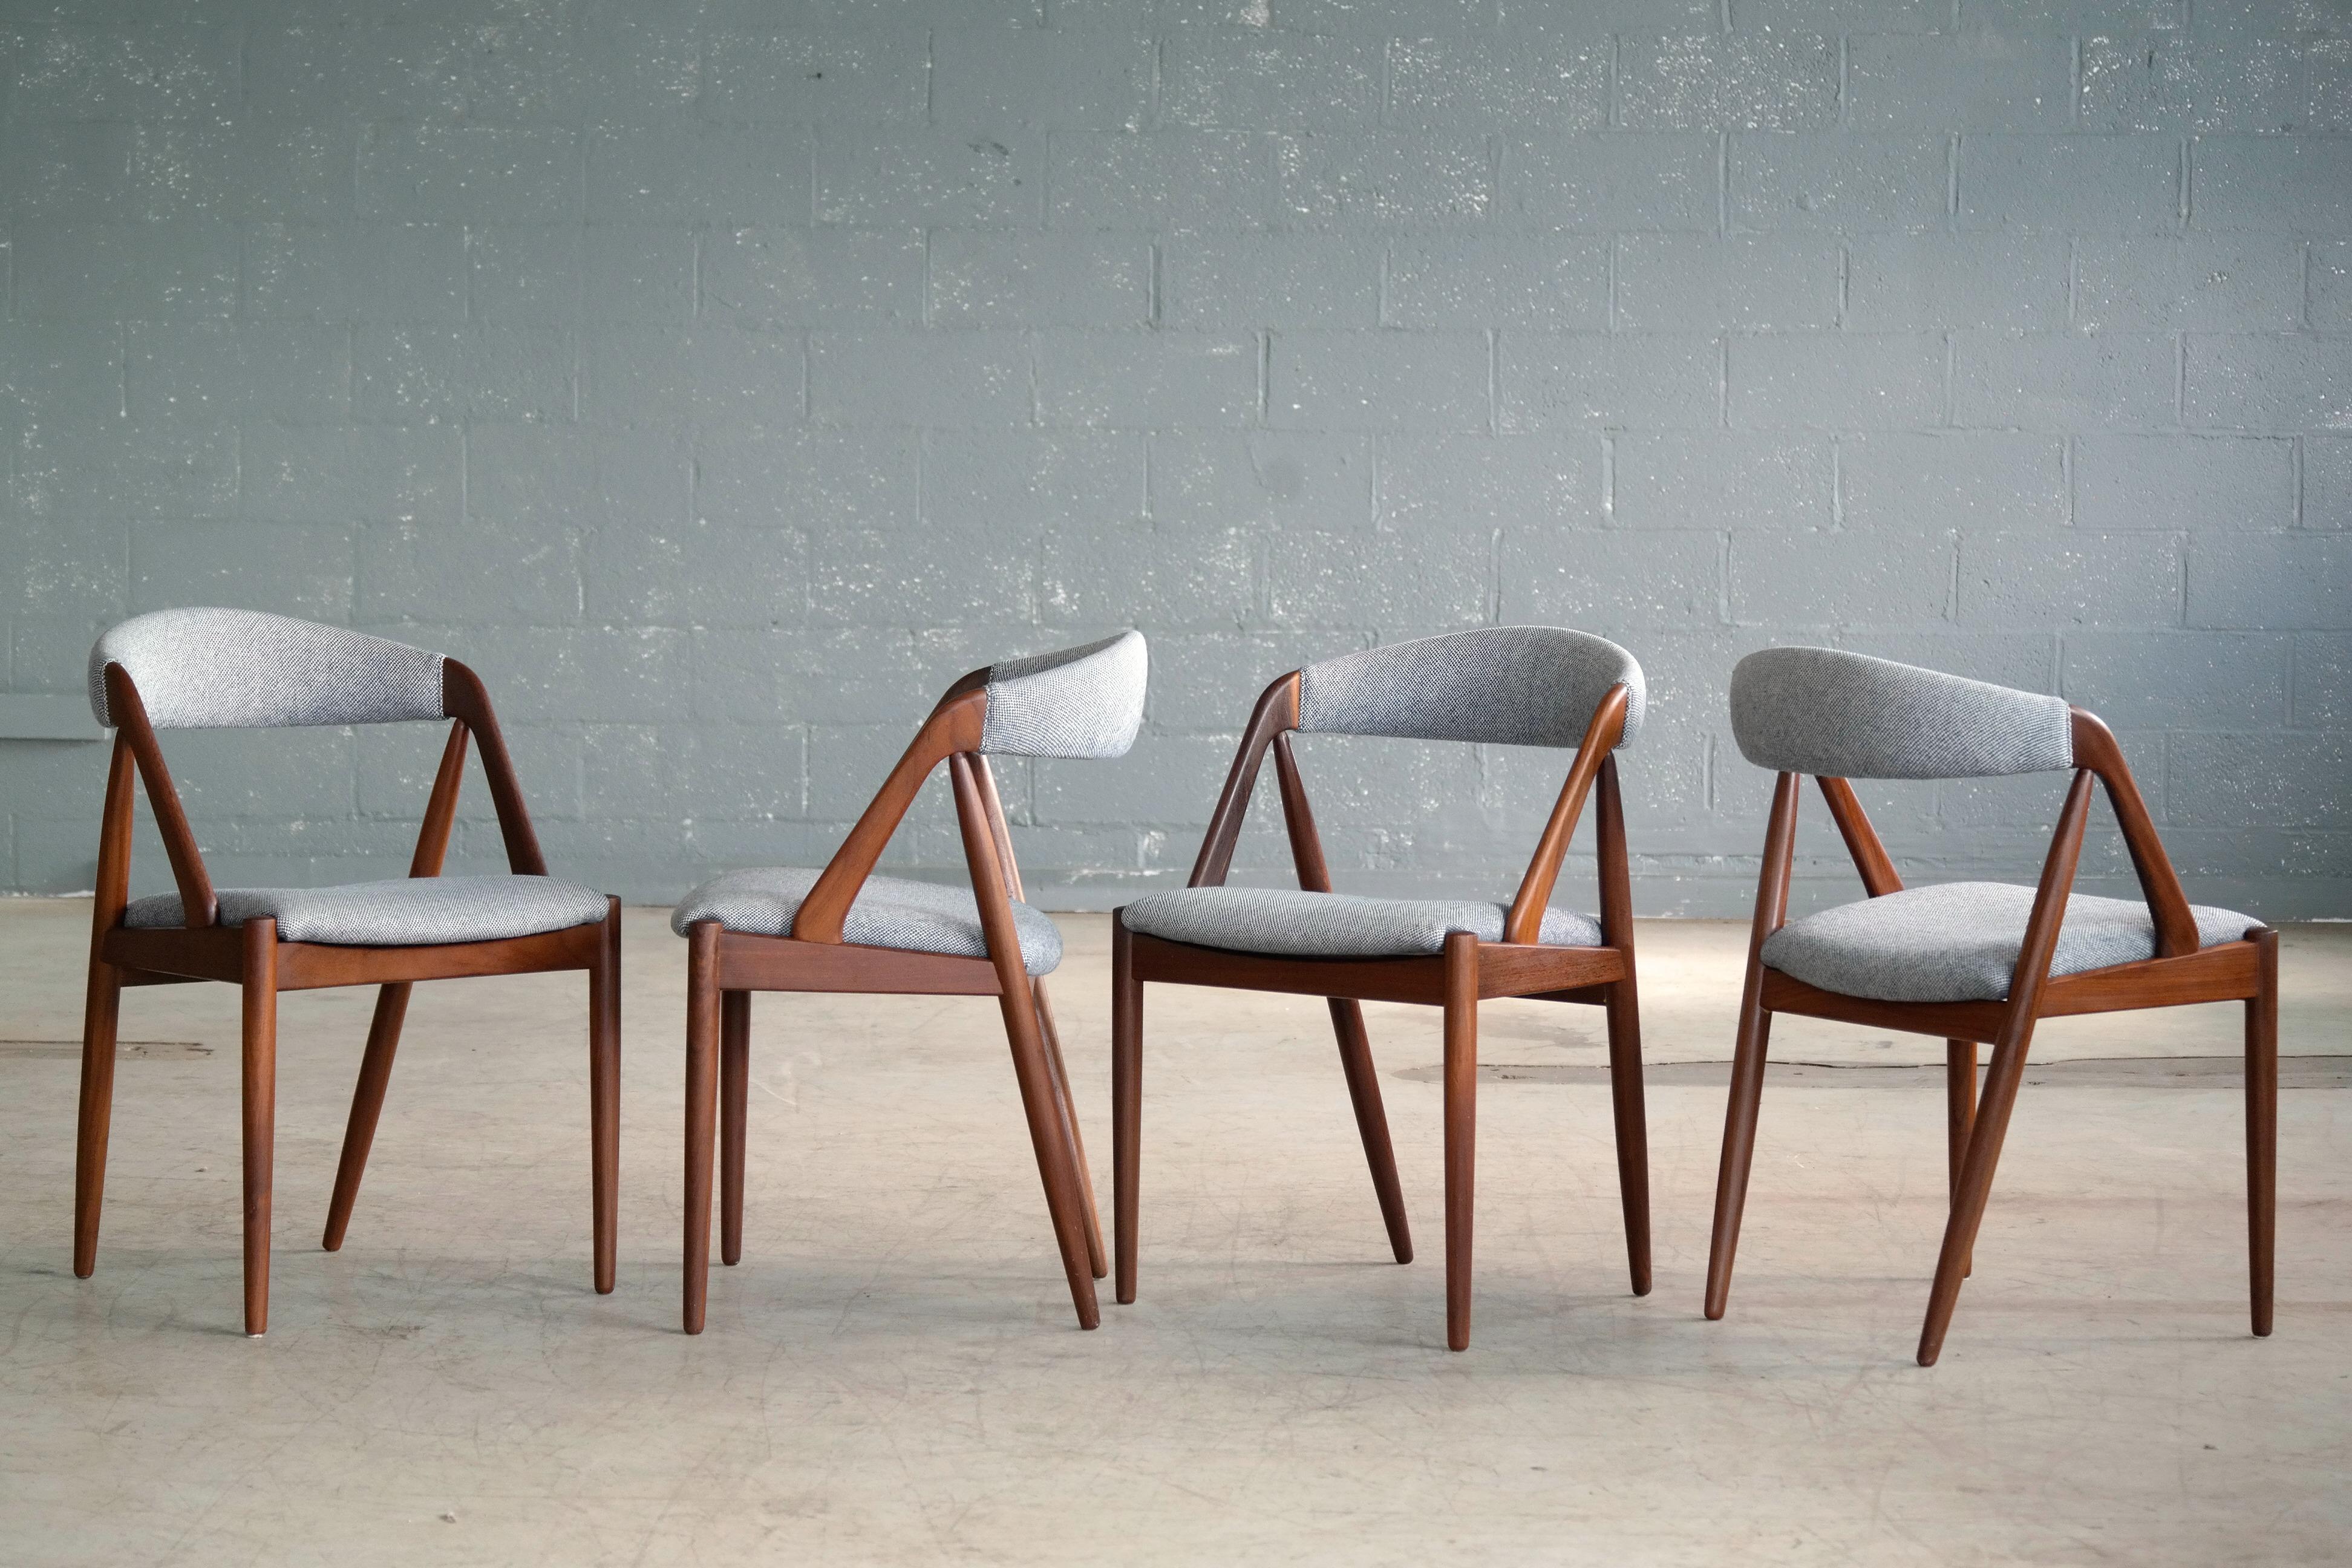 This set of iconic dining room chairs known as Model 31 were designed by Kai Kristiansen in 1956 and manufactured by Schou Andersen in the 1960s in Denmark. The model 31 has become one of the most enduring, iconic and sought after designs to come